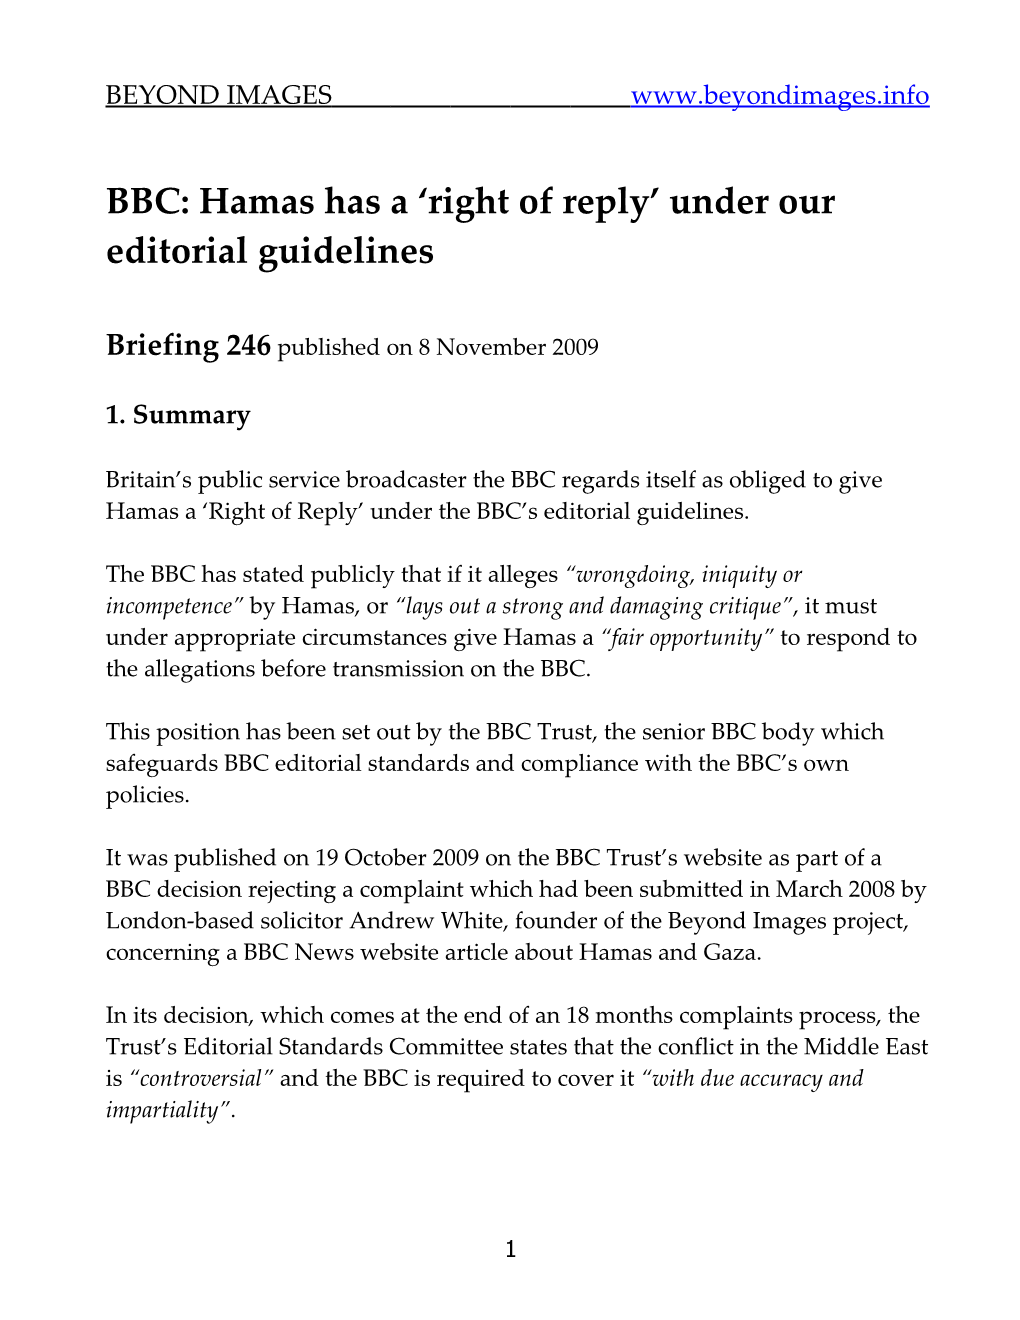 BBC: Hamas Has a Right of Reply Under Our Editorial Guidelines